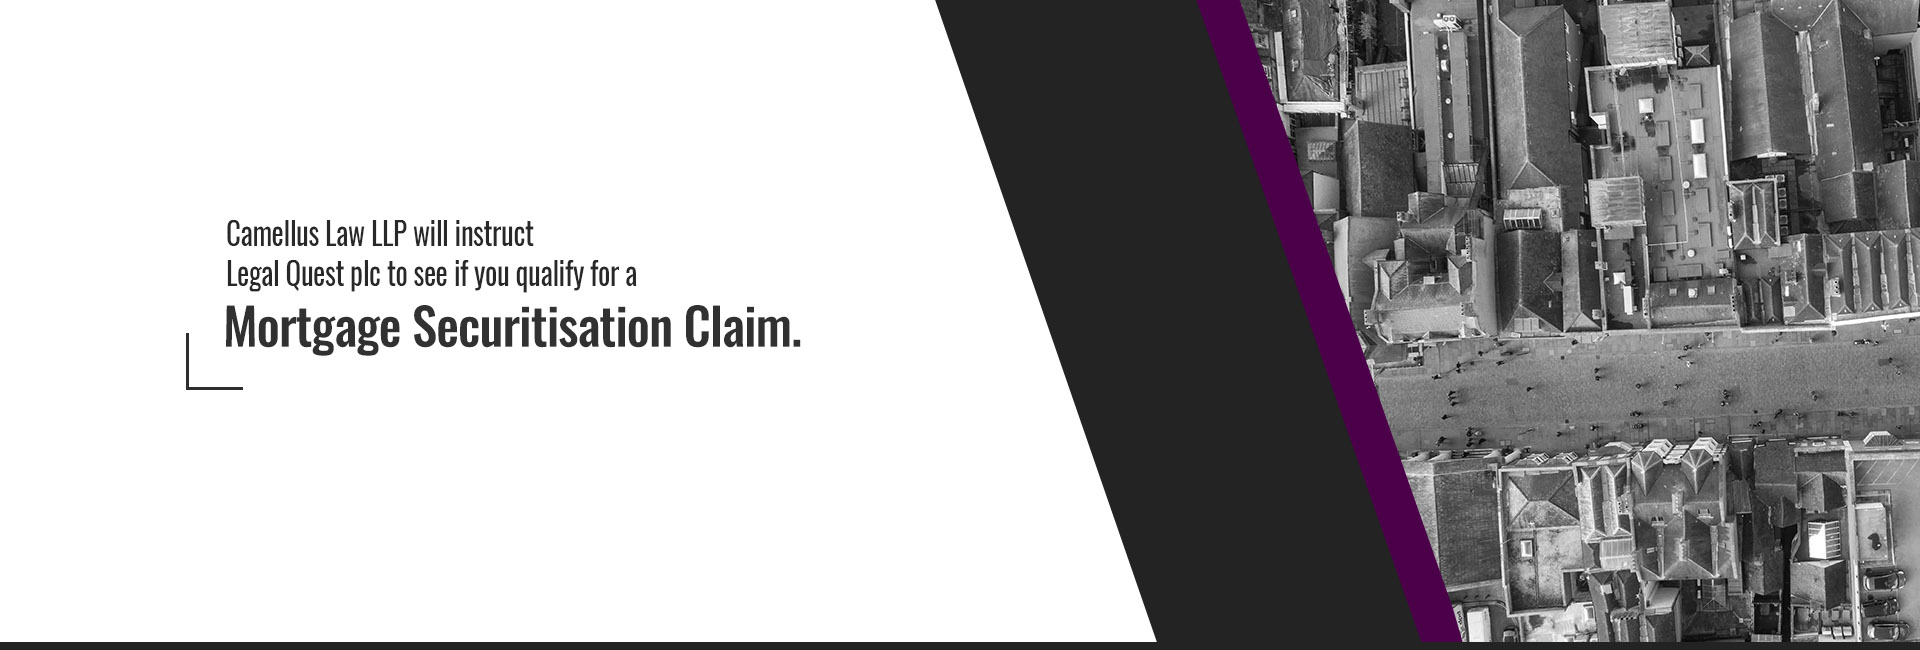 Do you have a Mortgage Securitisation Claim